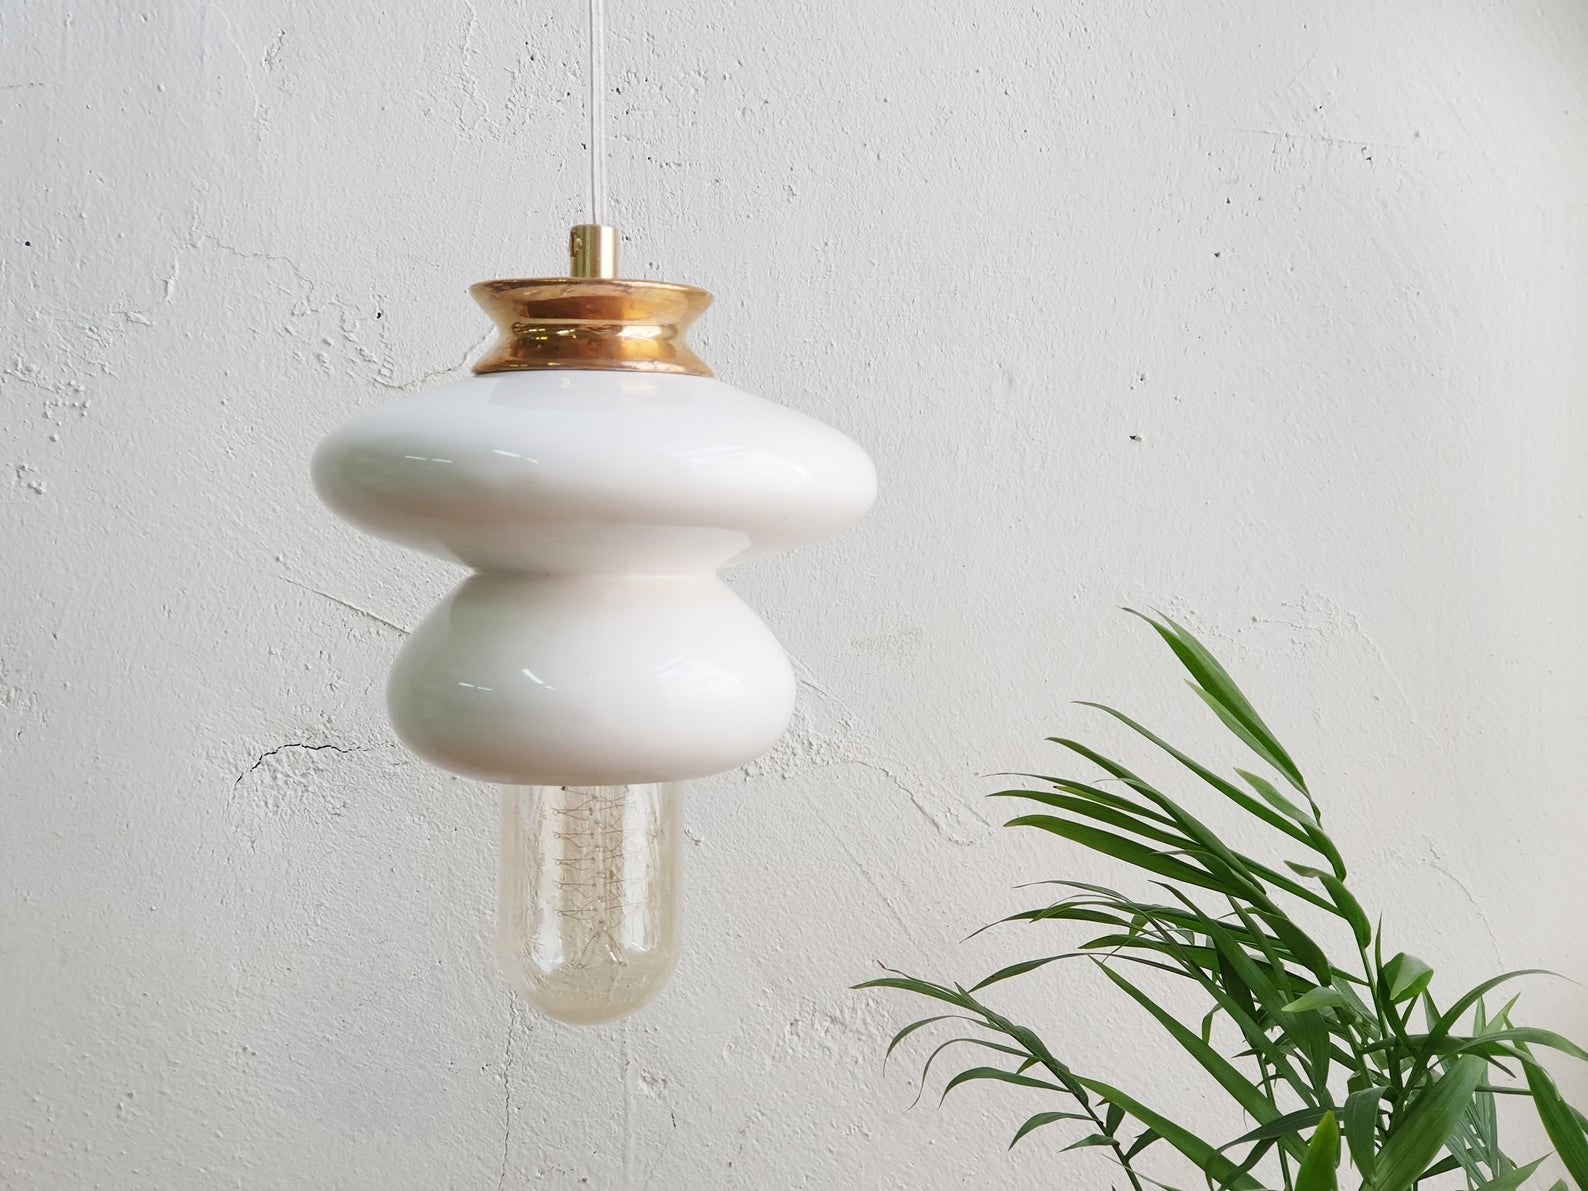 the pendant light with white round ceramic design in two different sizes and a gold end connecting it to the wire